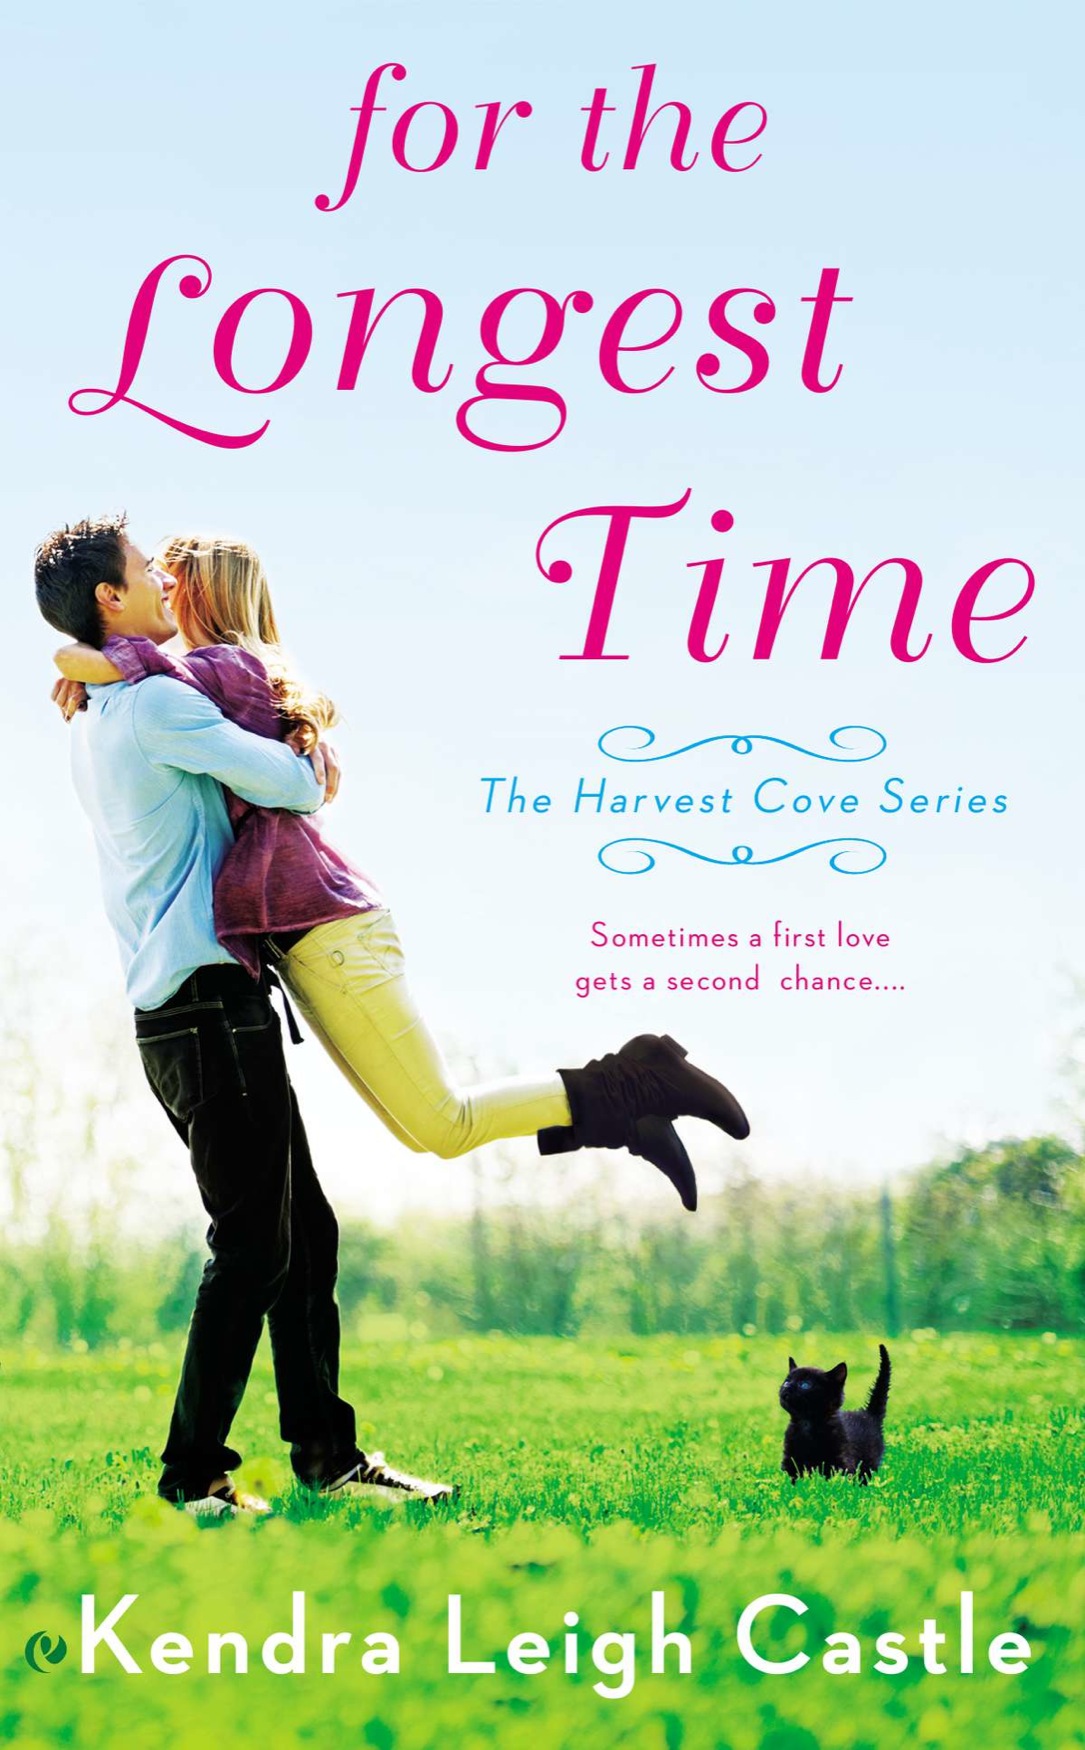 For the Longest Time (2014) by Kendra Leigh Castle